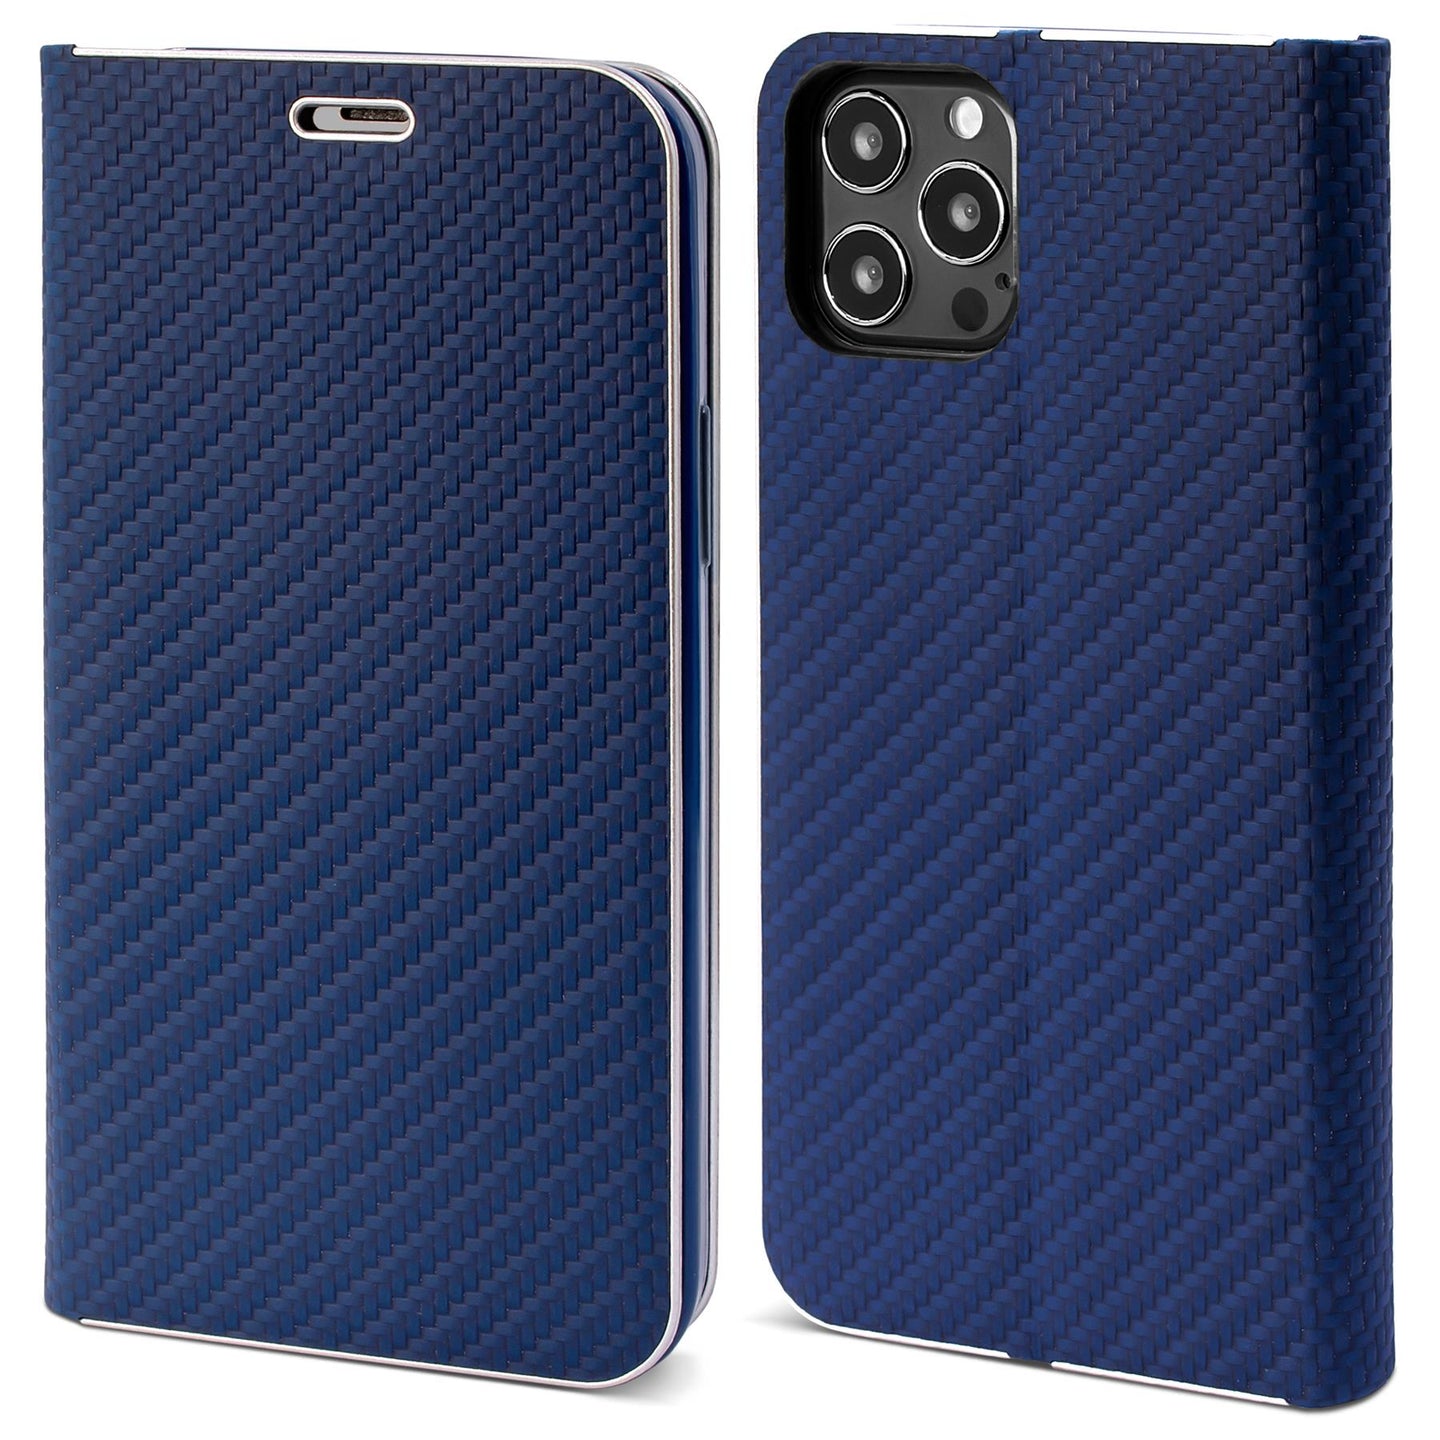 Moozy Wallet Case for iPhone 13 Pro Max, Dark Blue Carbon – Flip Case with Metallic Border Design Magnetic Closure Flip Cover with Card Holder